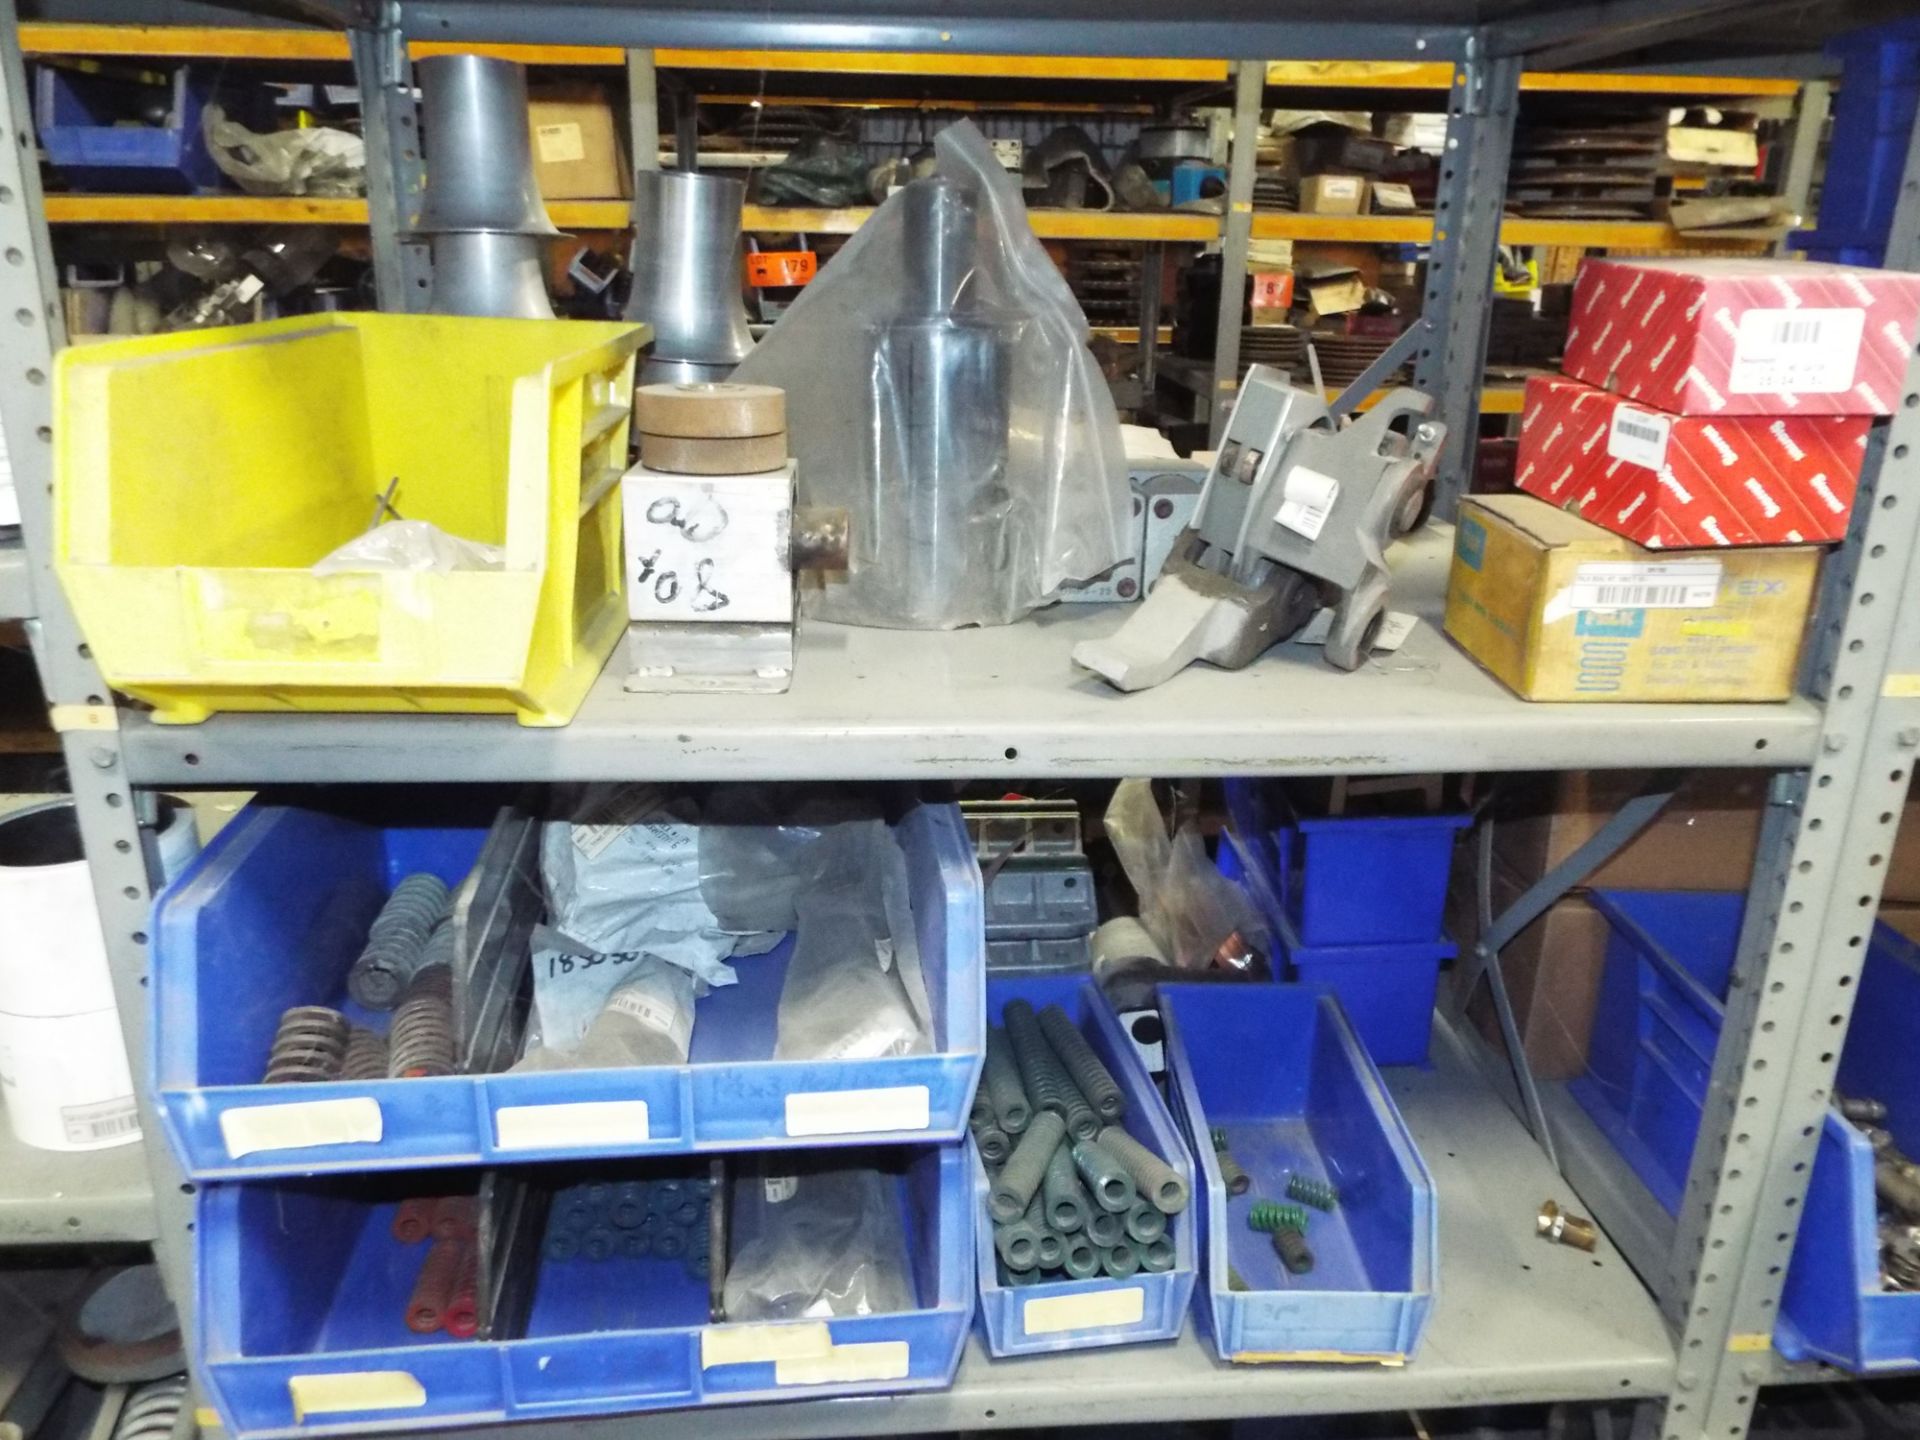 LOT/ CONTENTS OF SHELF - INCLUDING BUT NOT LIMITED TO CYLINDERS, SPRINGS AND SPARE PARTS - Image 7 of 8